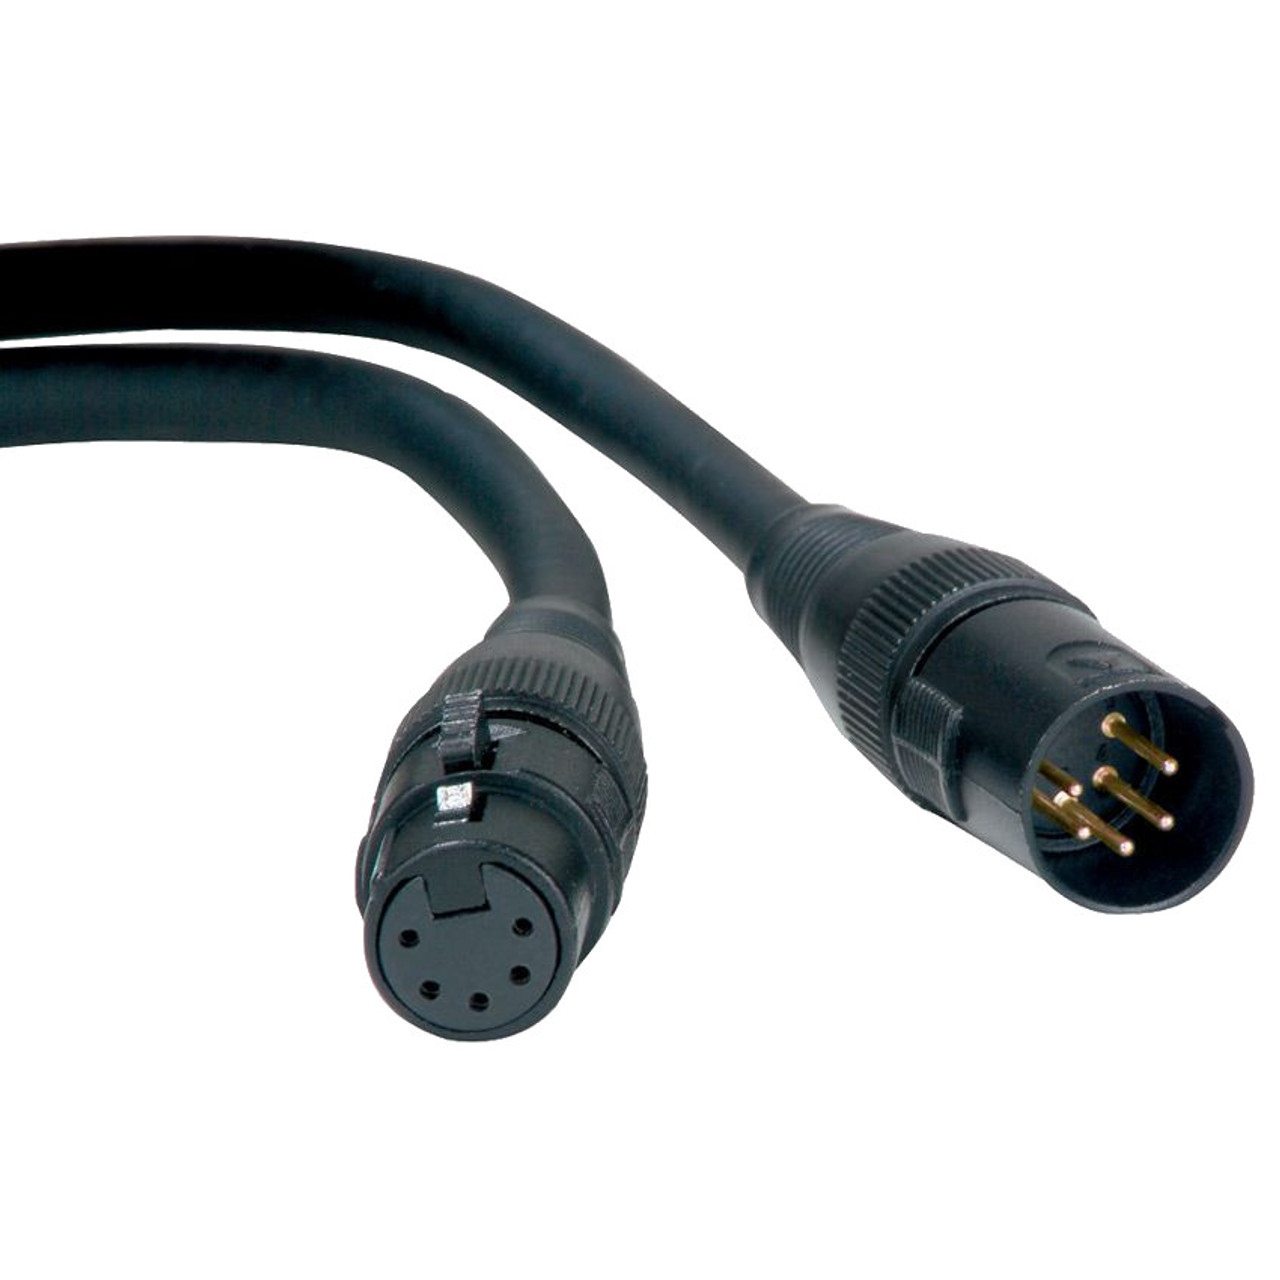 Accu-Cable AC5PDMX 5-Pin Male to 5-Pin Female DMX Cable - Sound Productions